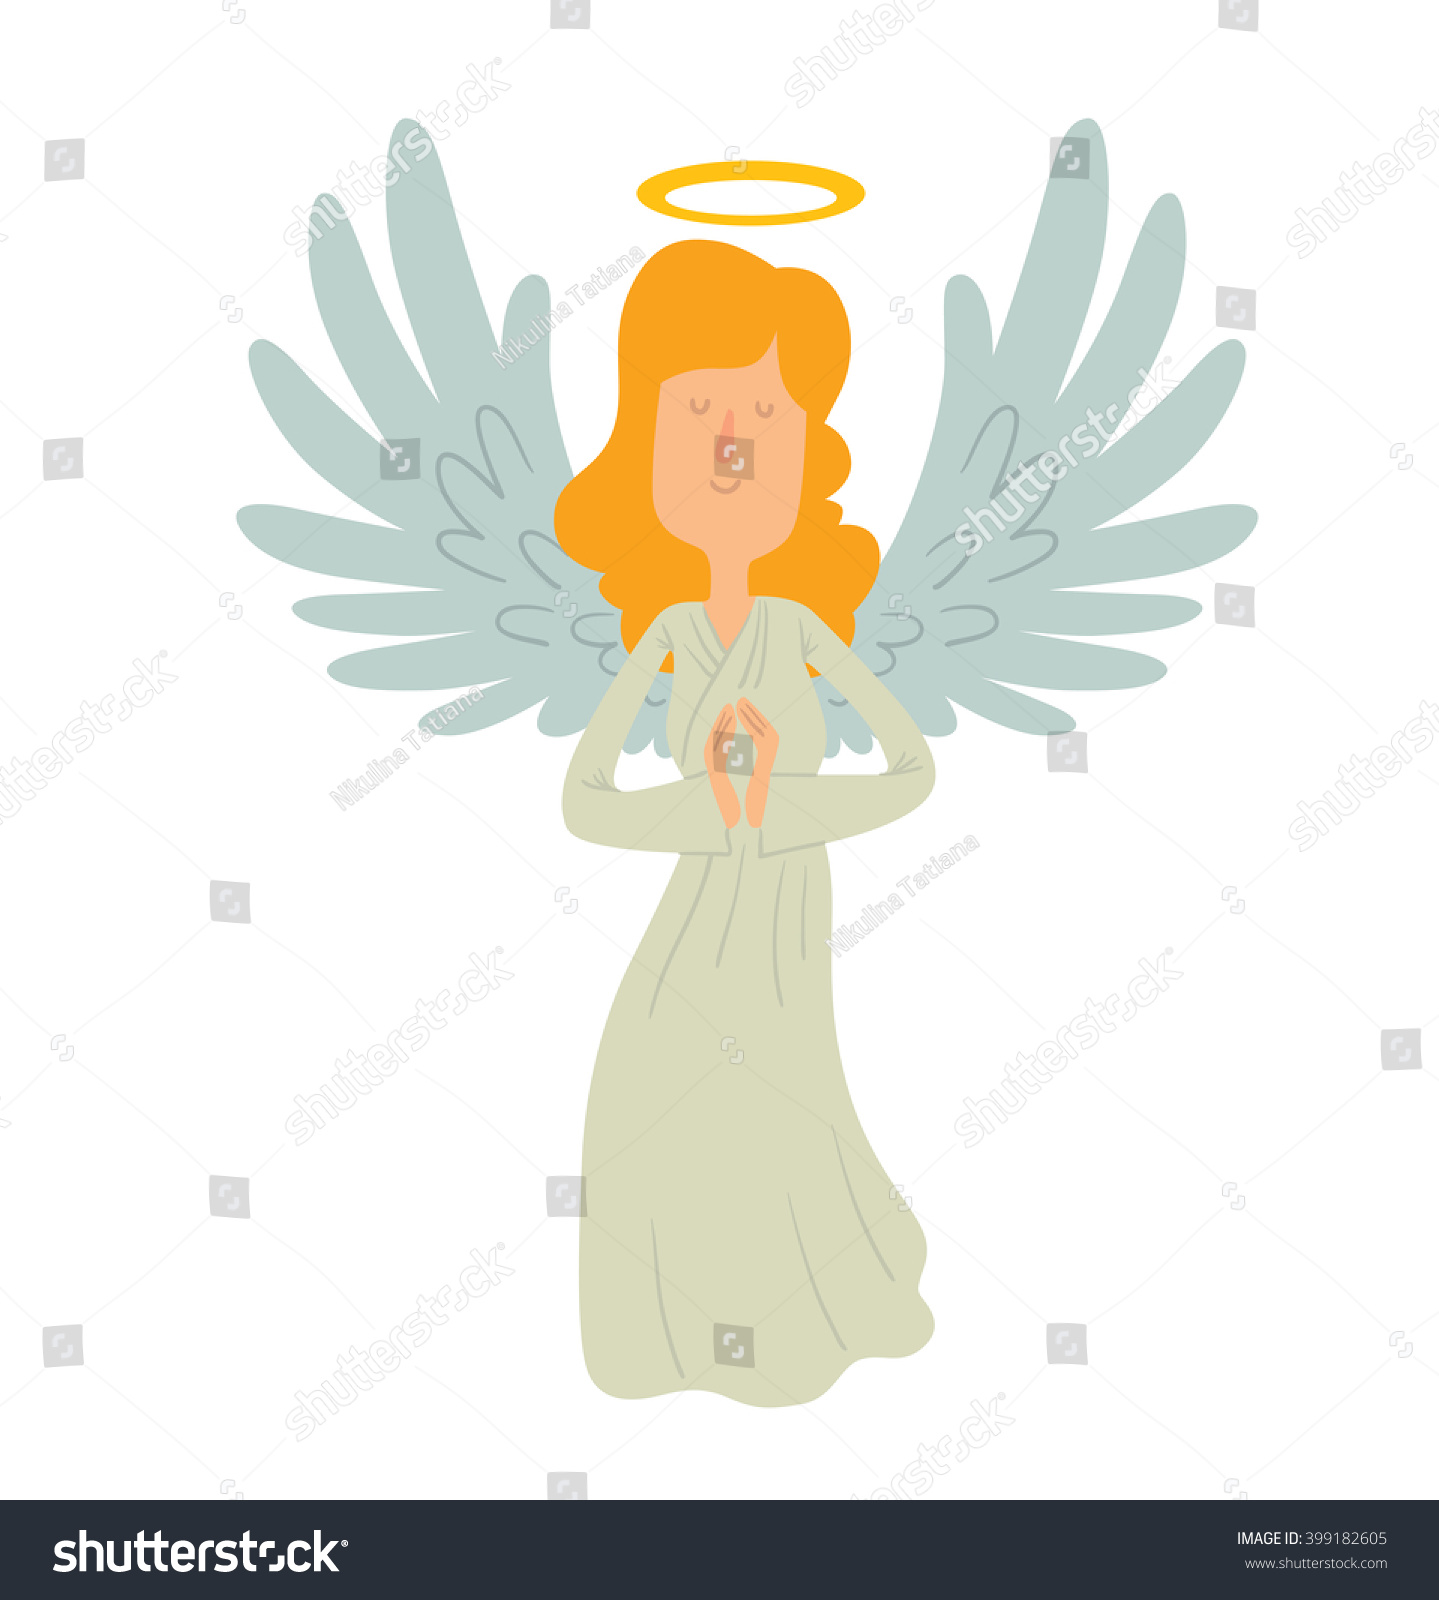 Vector Cartoon Image Of A Female Angel Female Angel With Blond Hair In A White Chasuble Angel